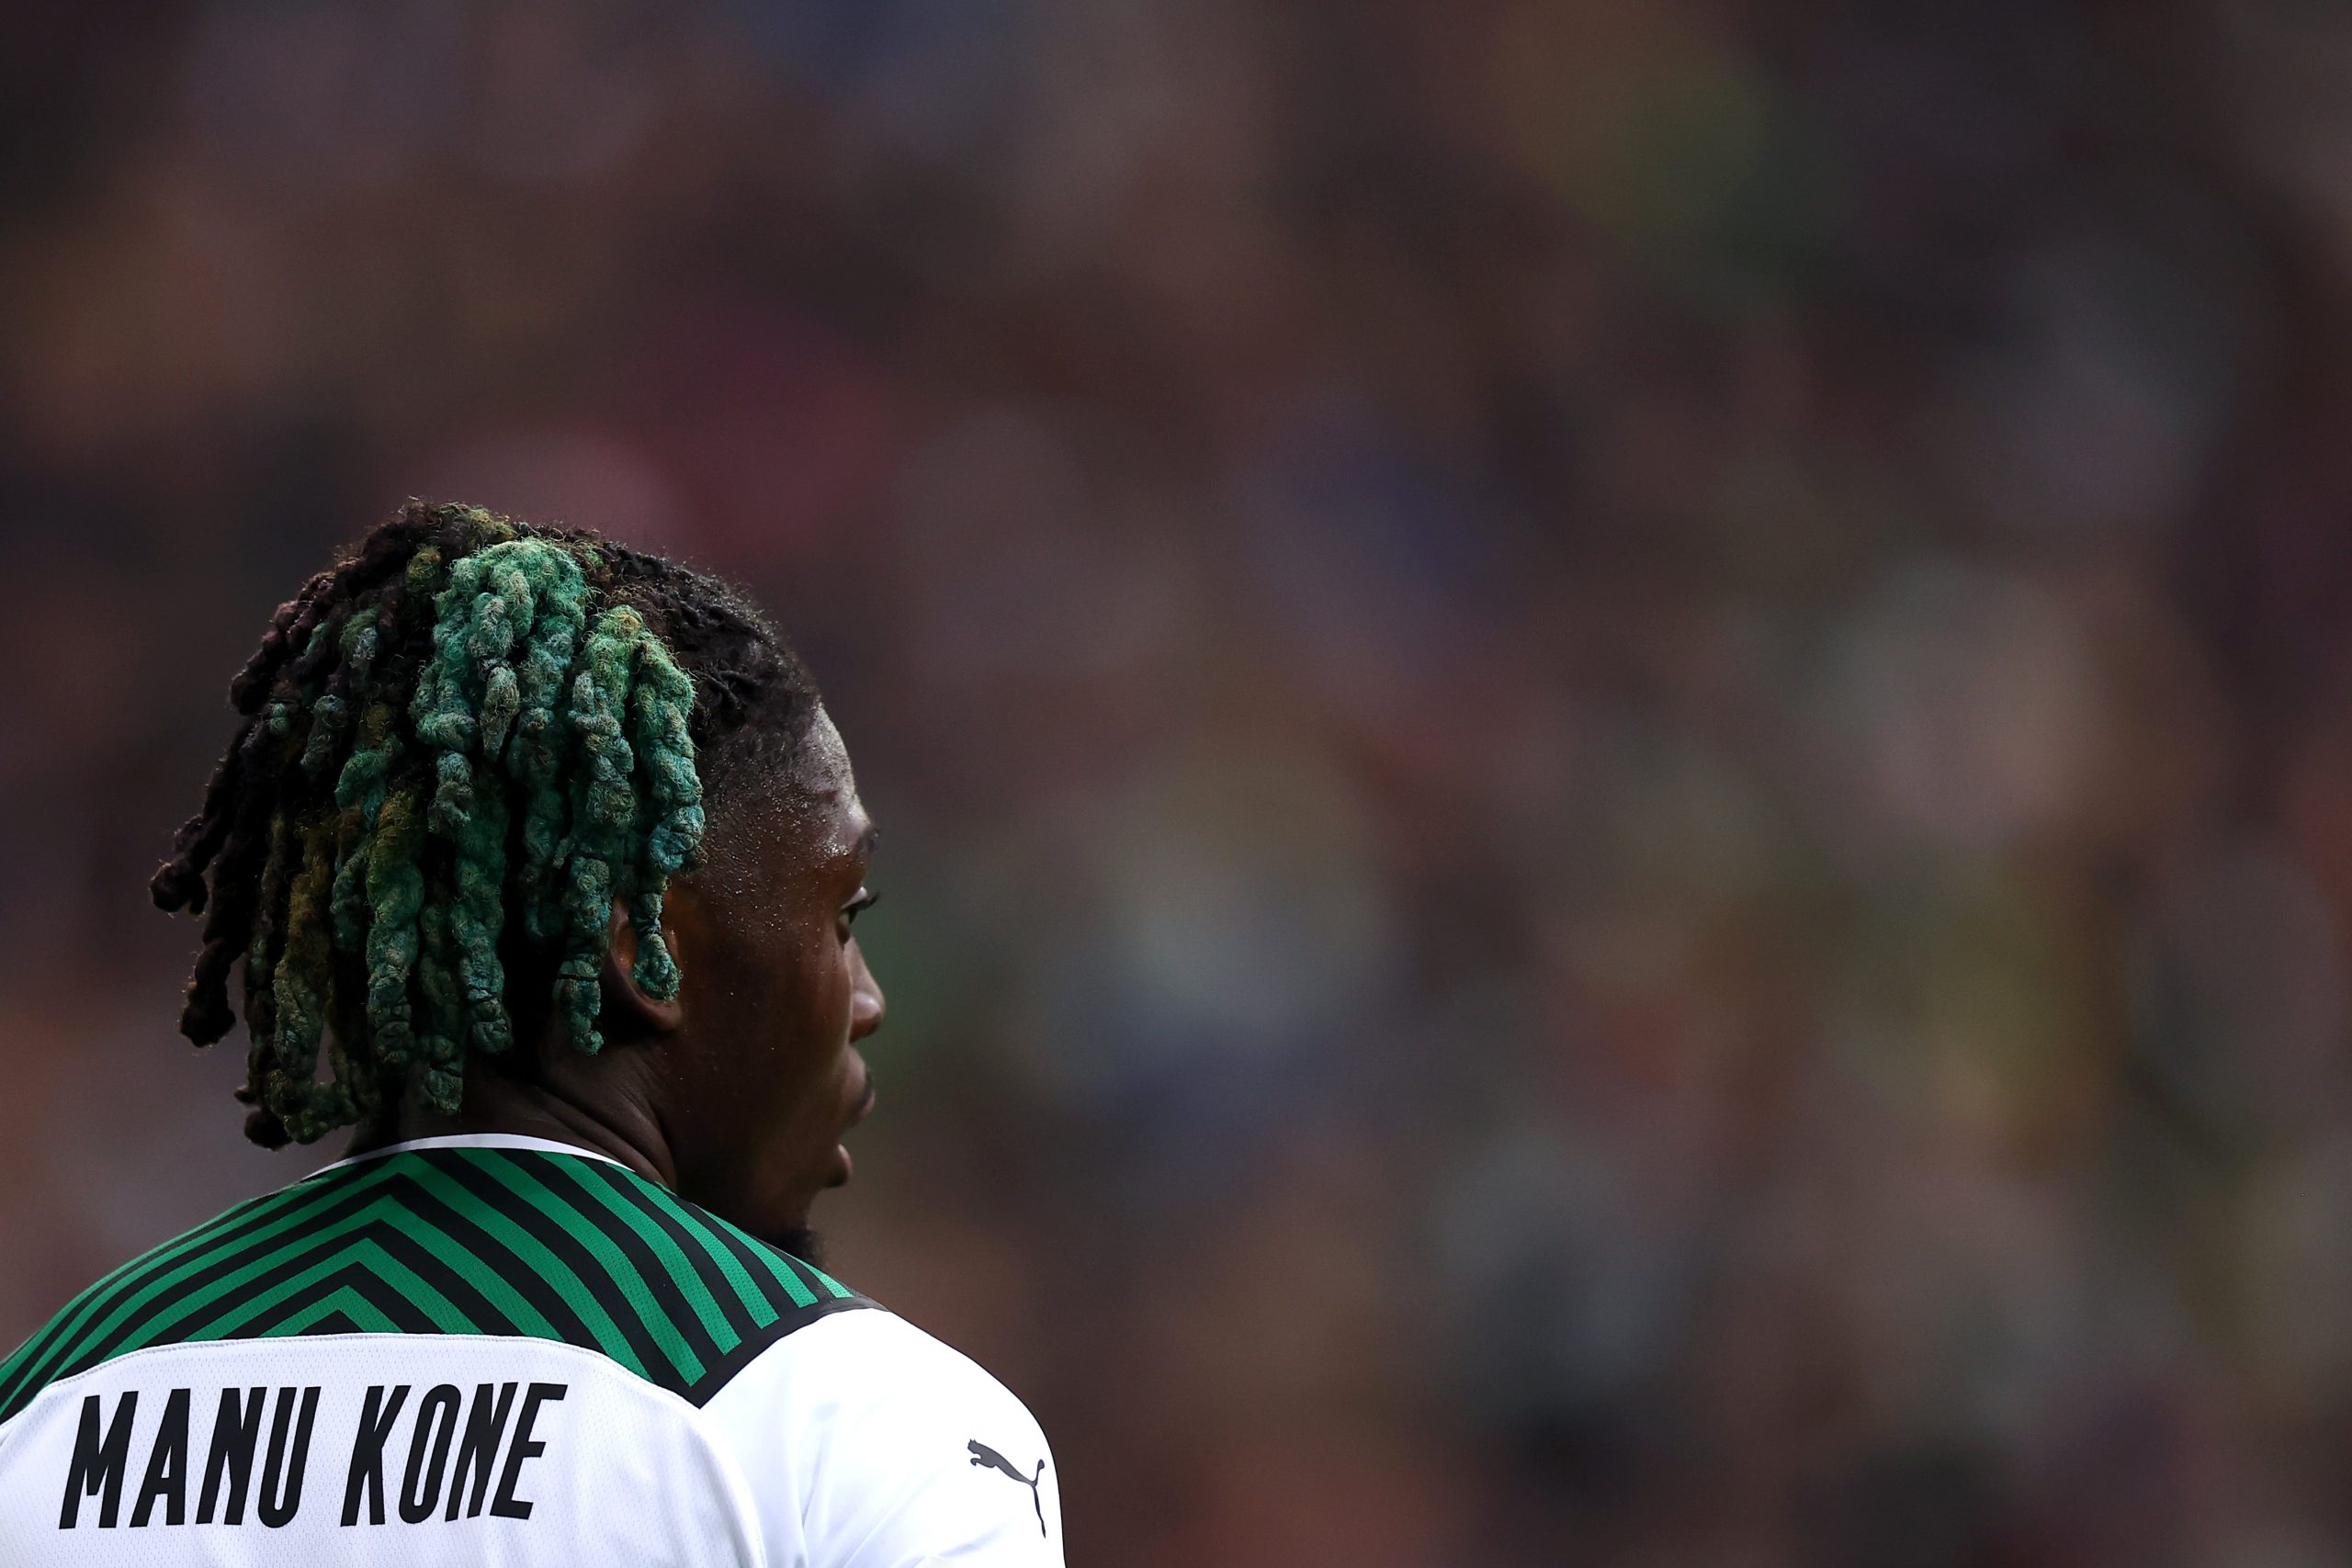 Chelsea to face competition from Newcastle United in signing Kouadio Kone.